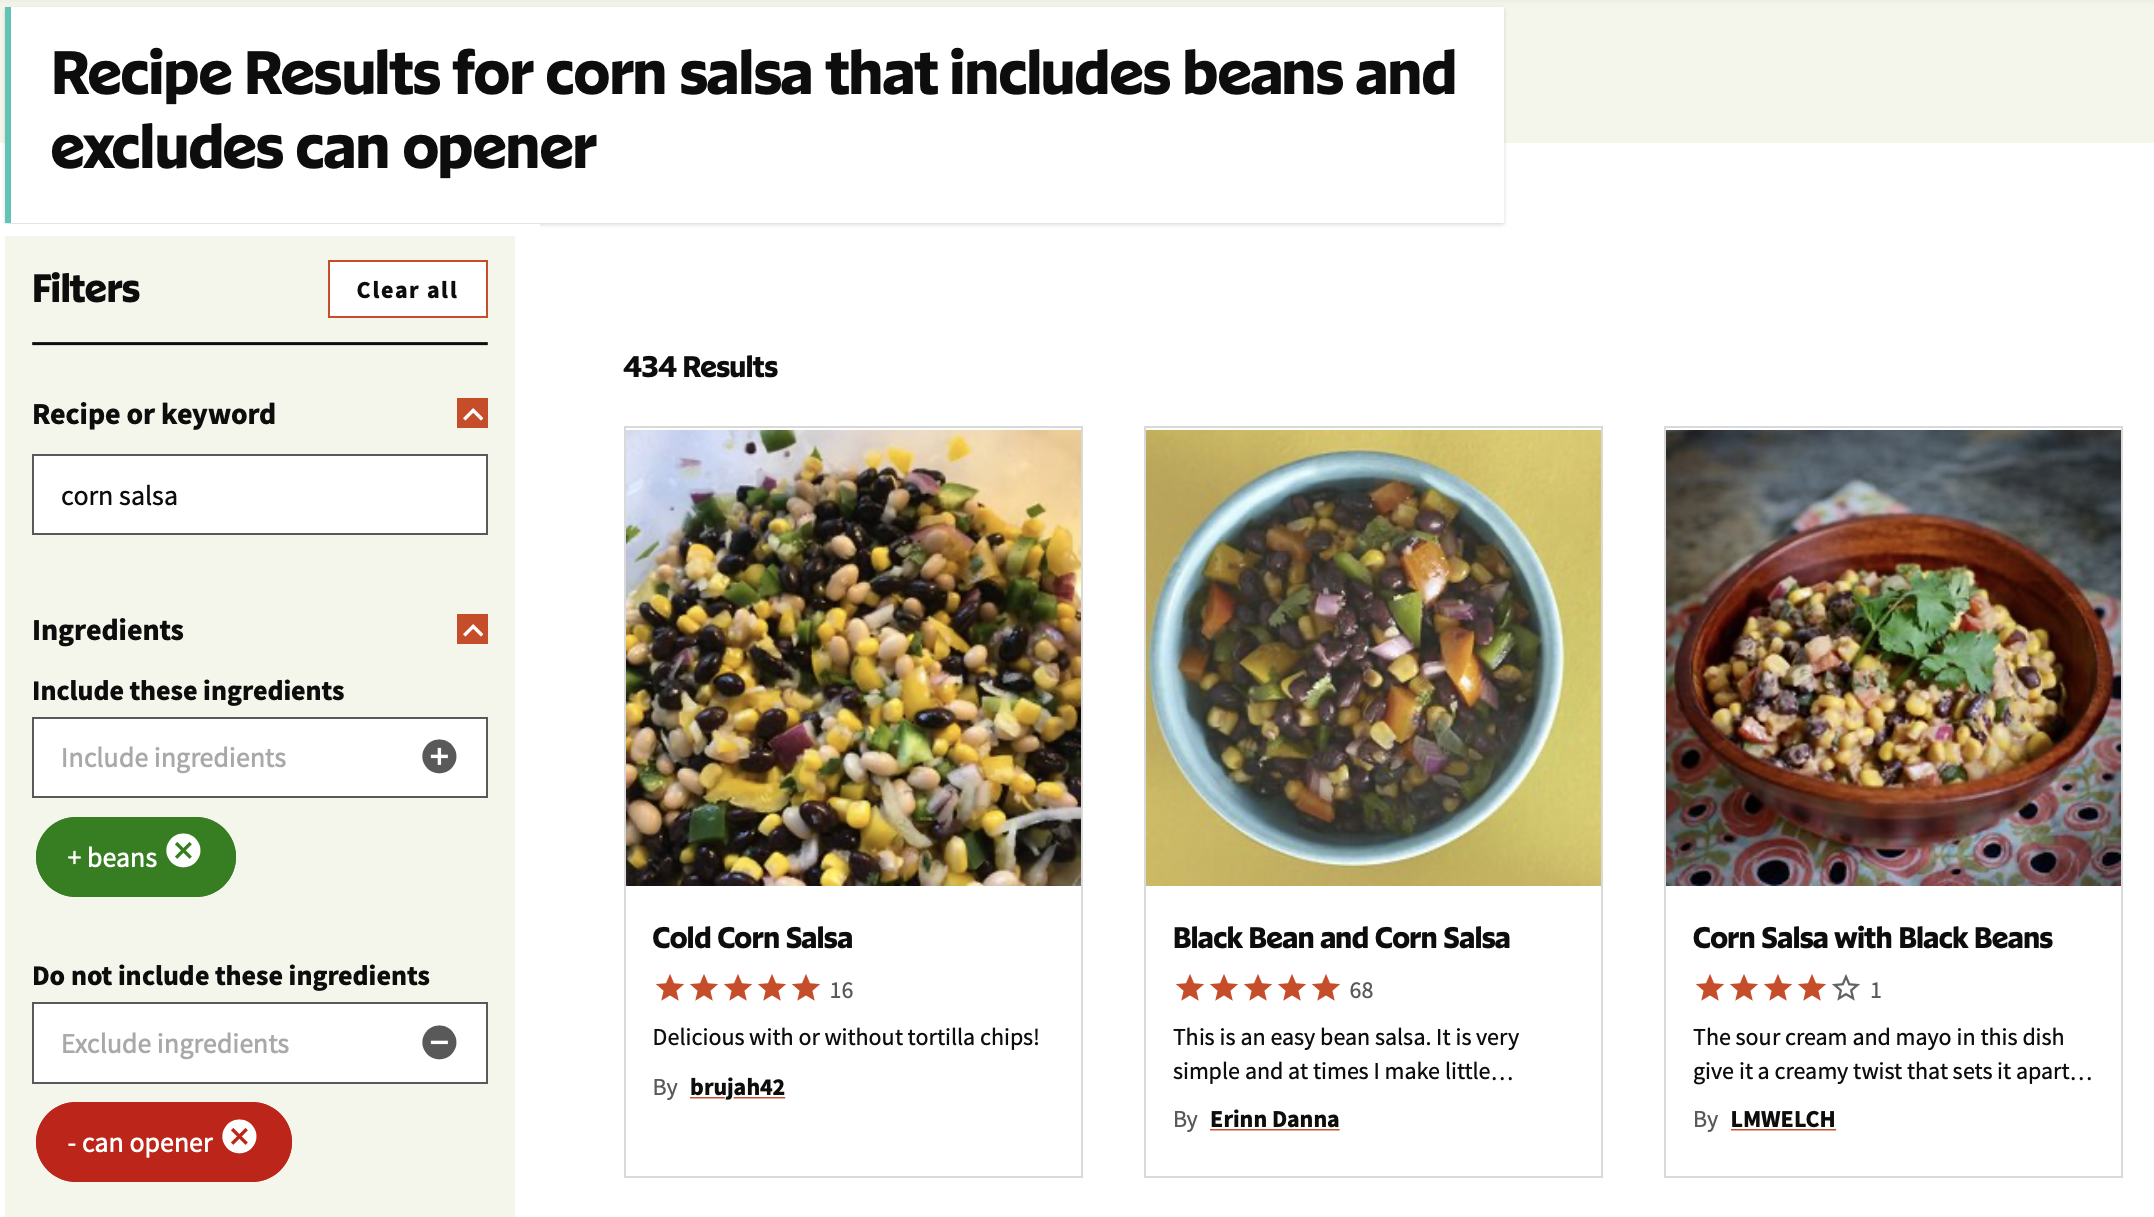 the results are all for corn salsa